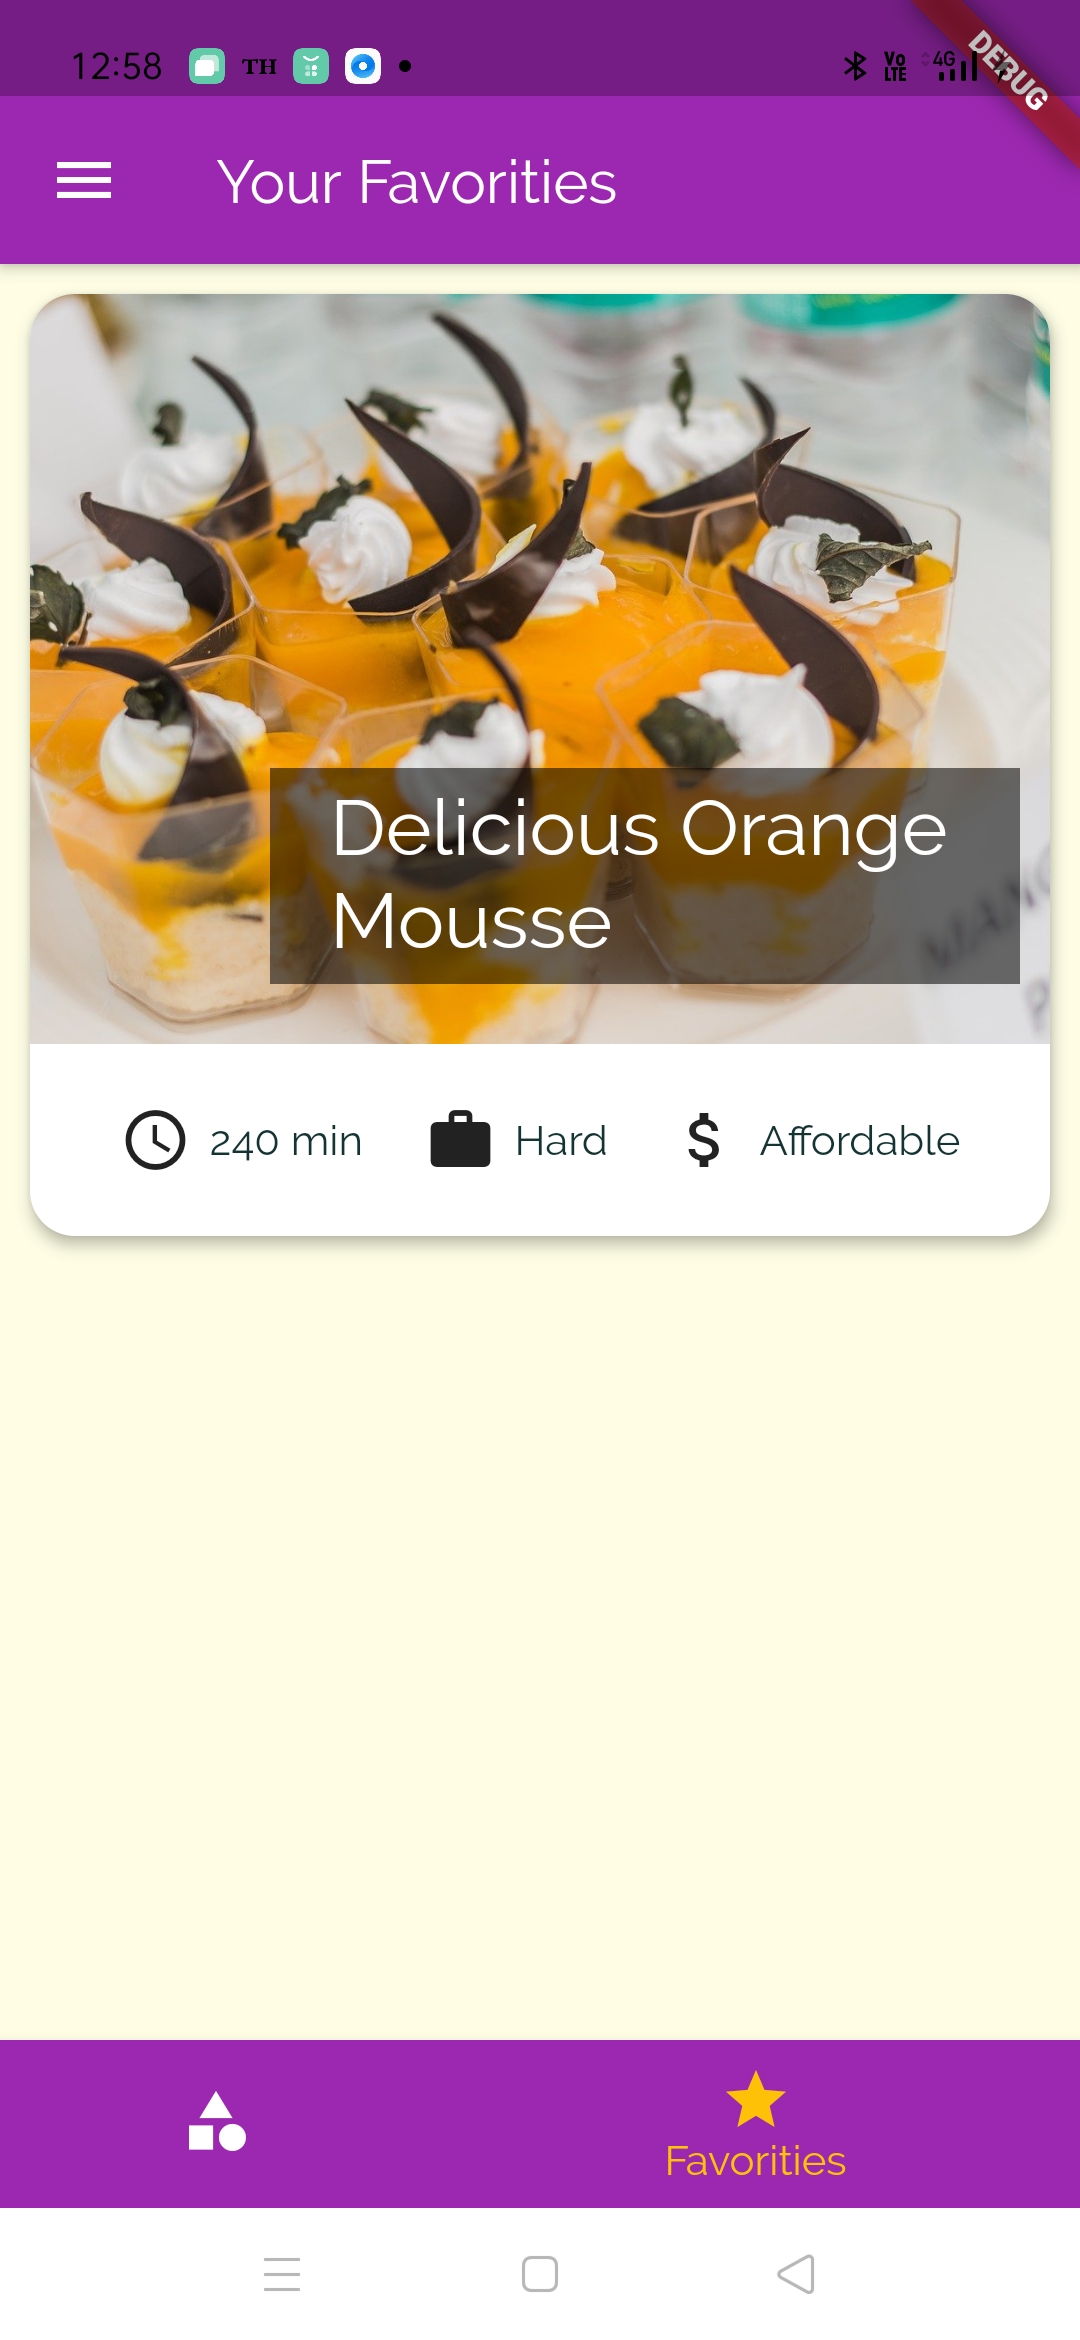 A Wonderful app to connect us with famous dishes across the world